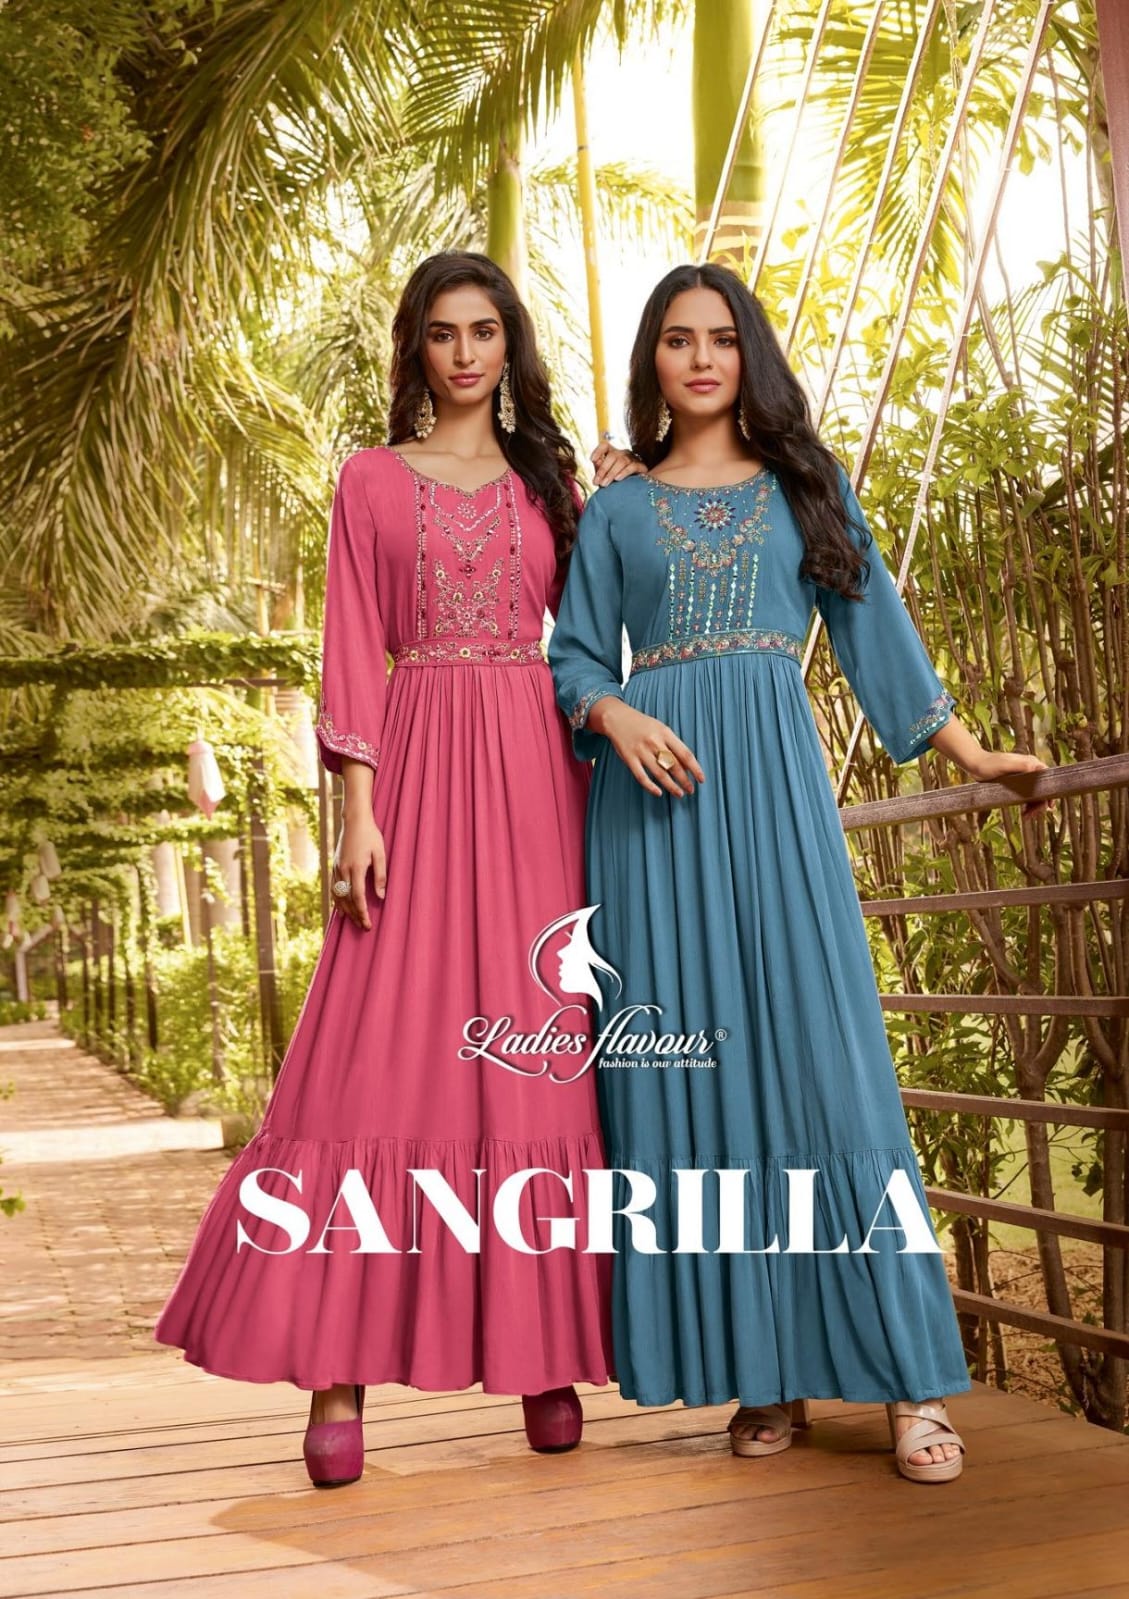 Sangrilla Ladies Flavour Rayon One Piece Gown